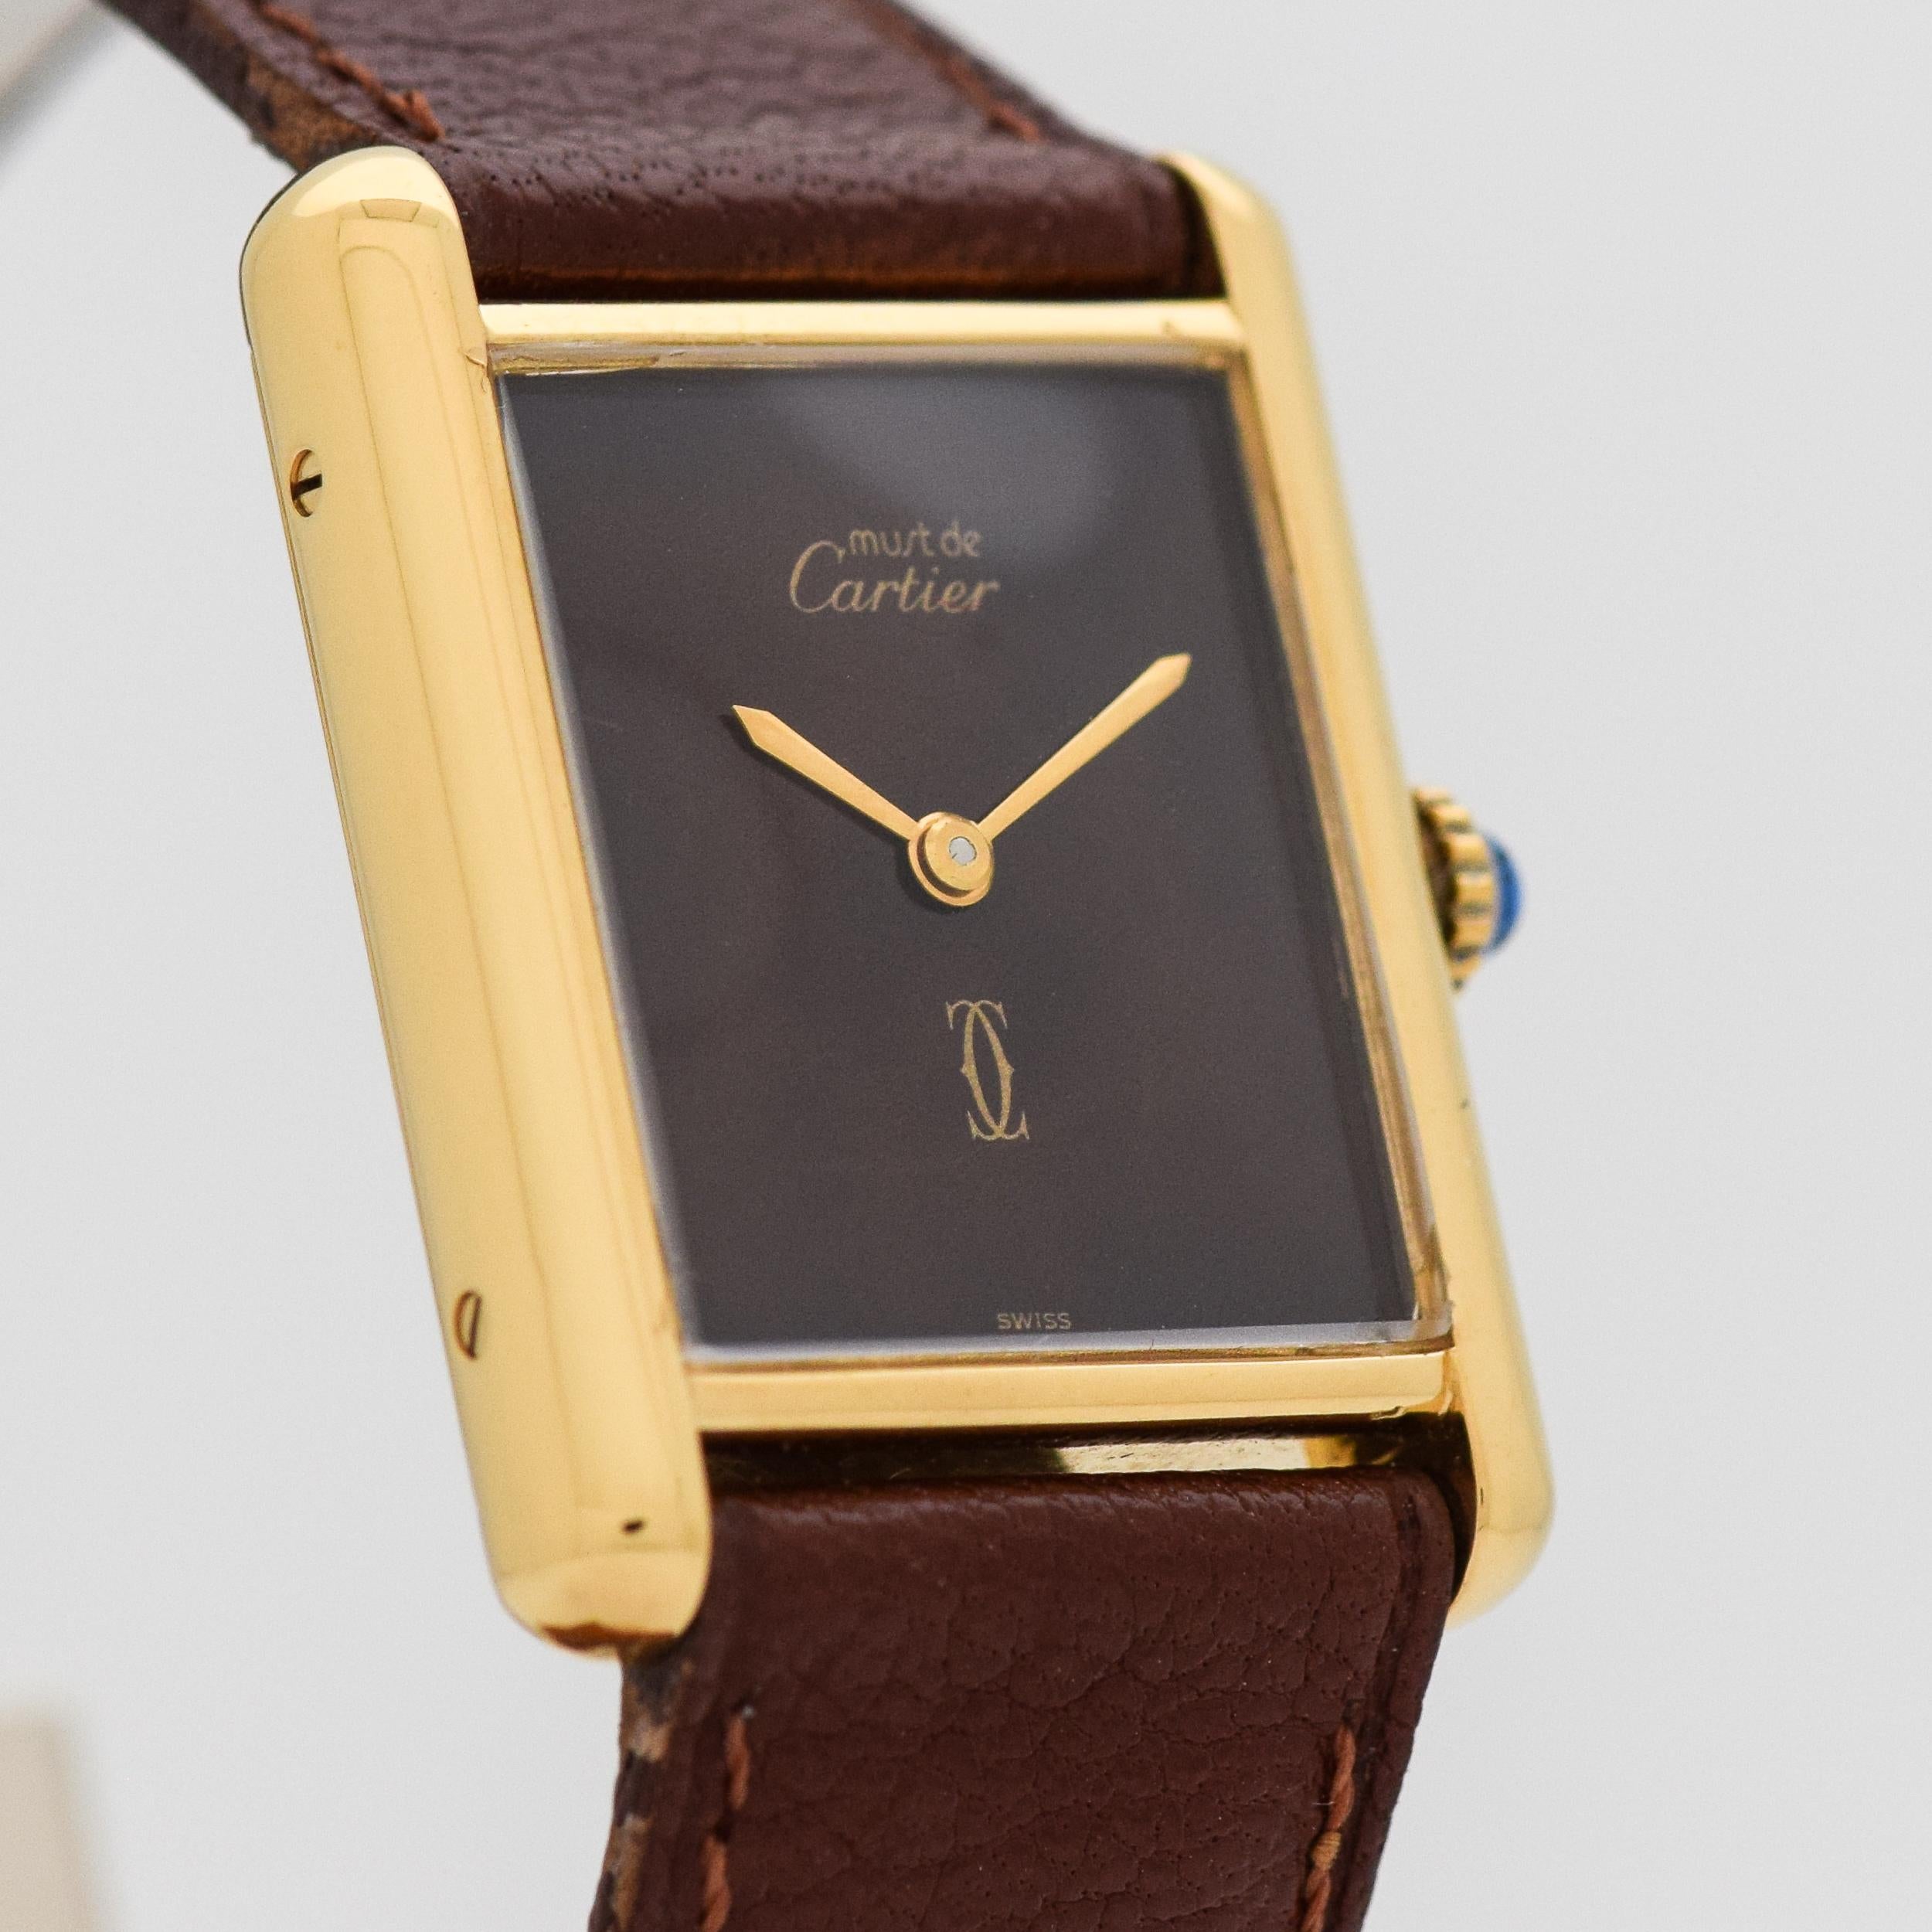 1980's Vintage Cartier Men's Classic Size Must de Tank 18k Yellow Gold Plated Over Sterling Silver watch with Original Brown Dial with Genuine Cartier Leather Strap and Cartier Buckle. Triple Signed. 23mm x 30mm lug to lug (0.91 in. x 1.18 in.) - 17